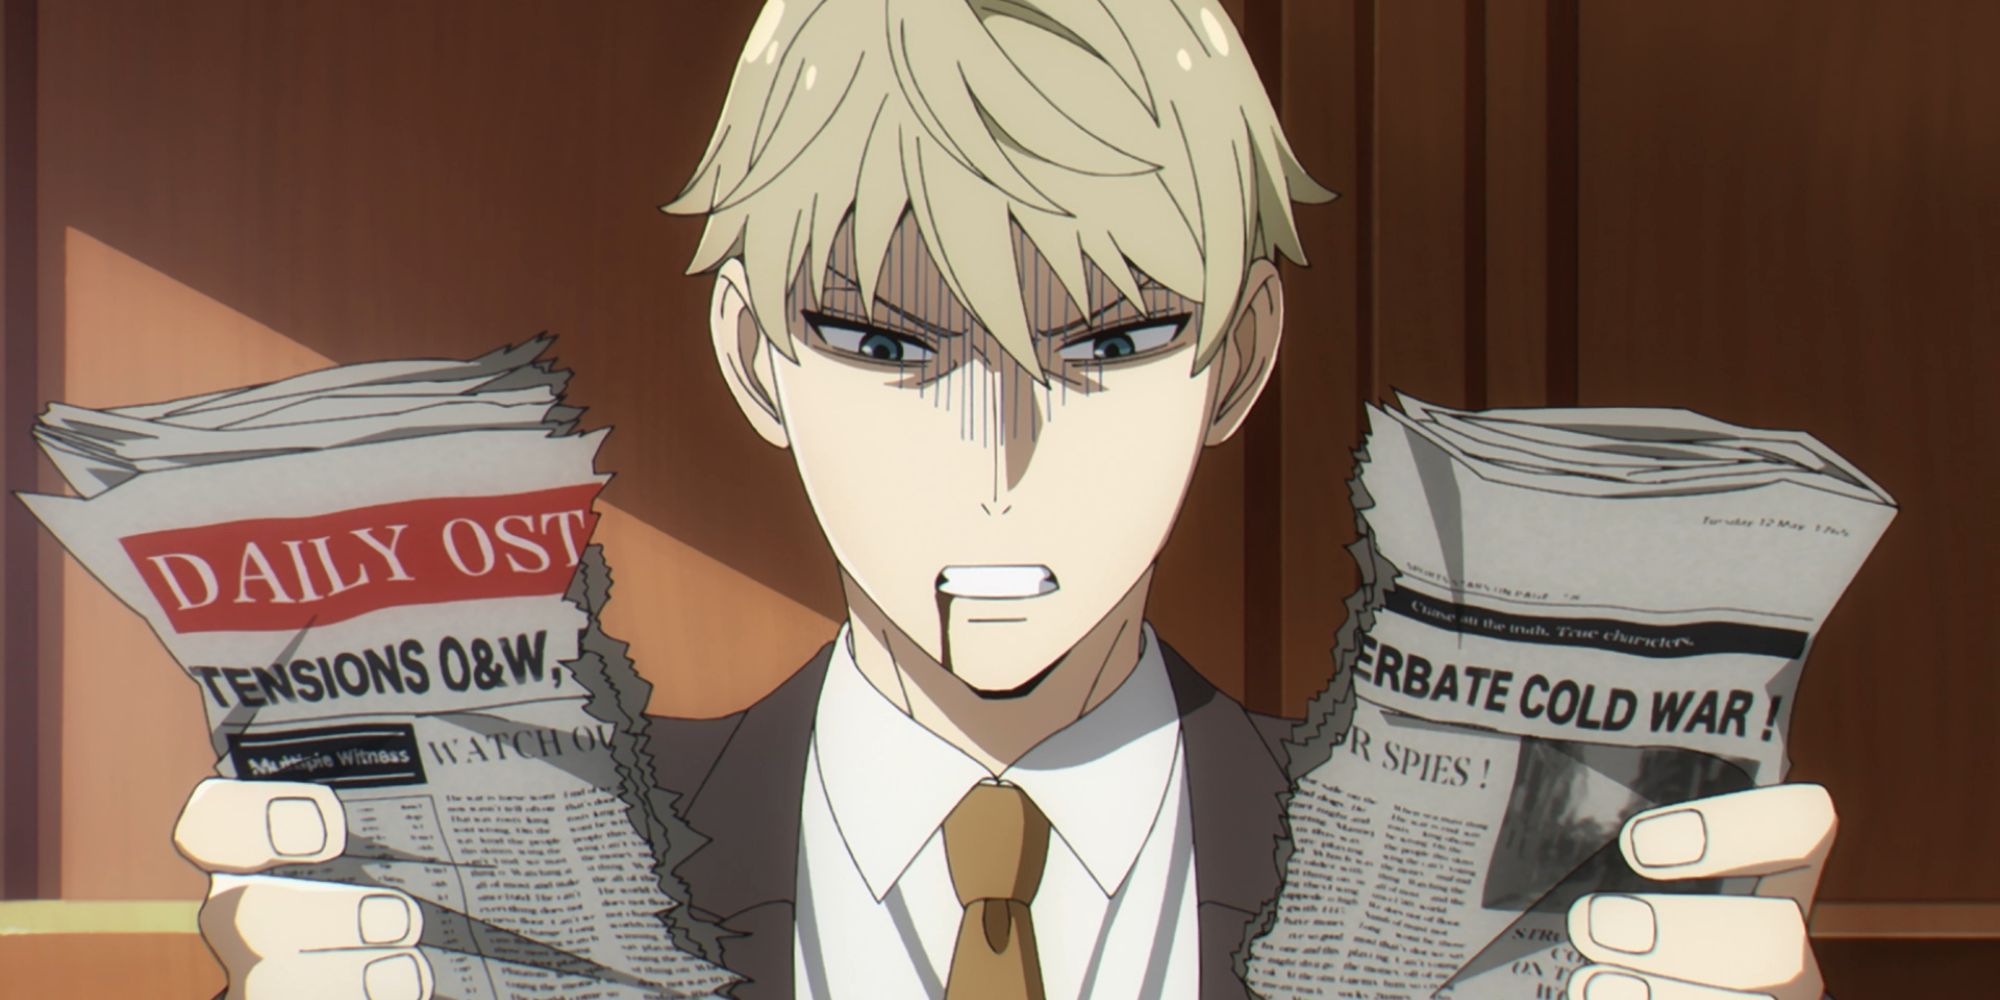 Lloyd angrily tears up a newspaper in Spy x Family